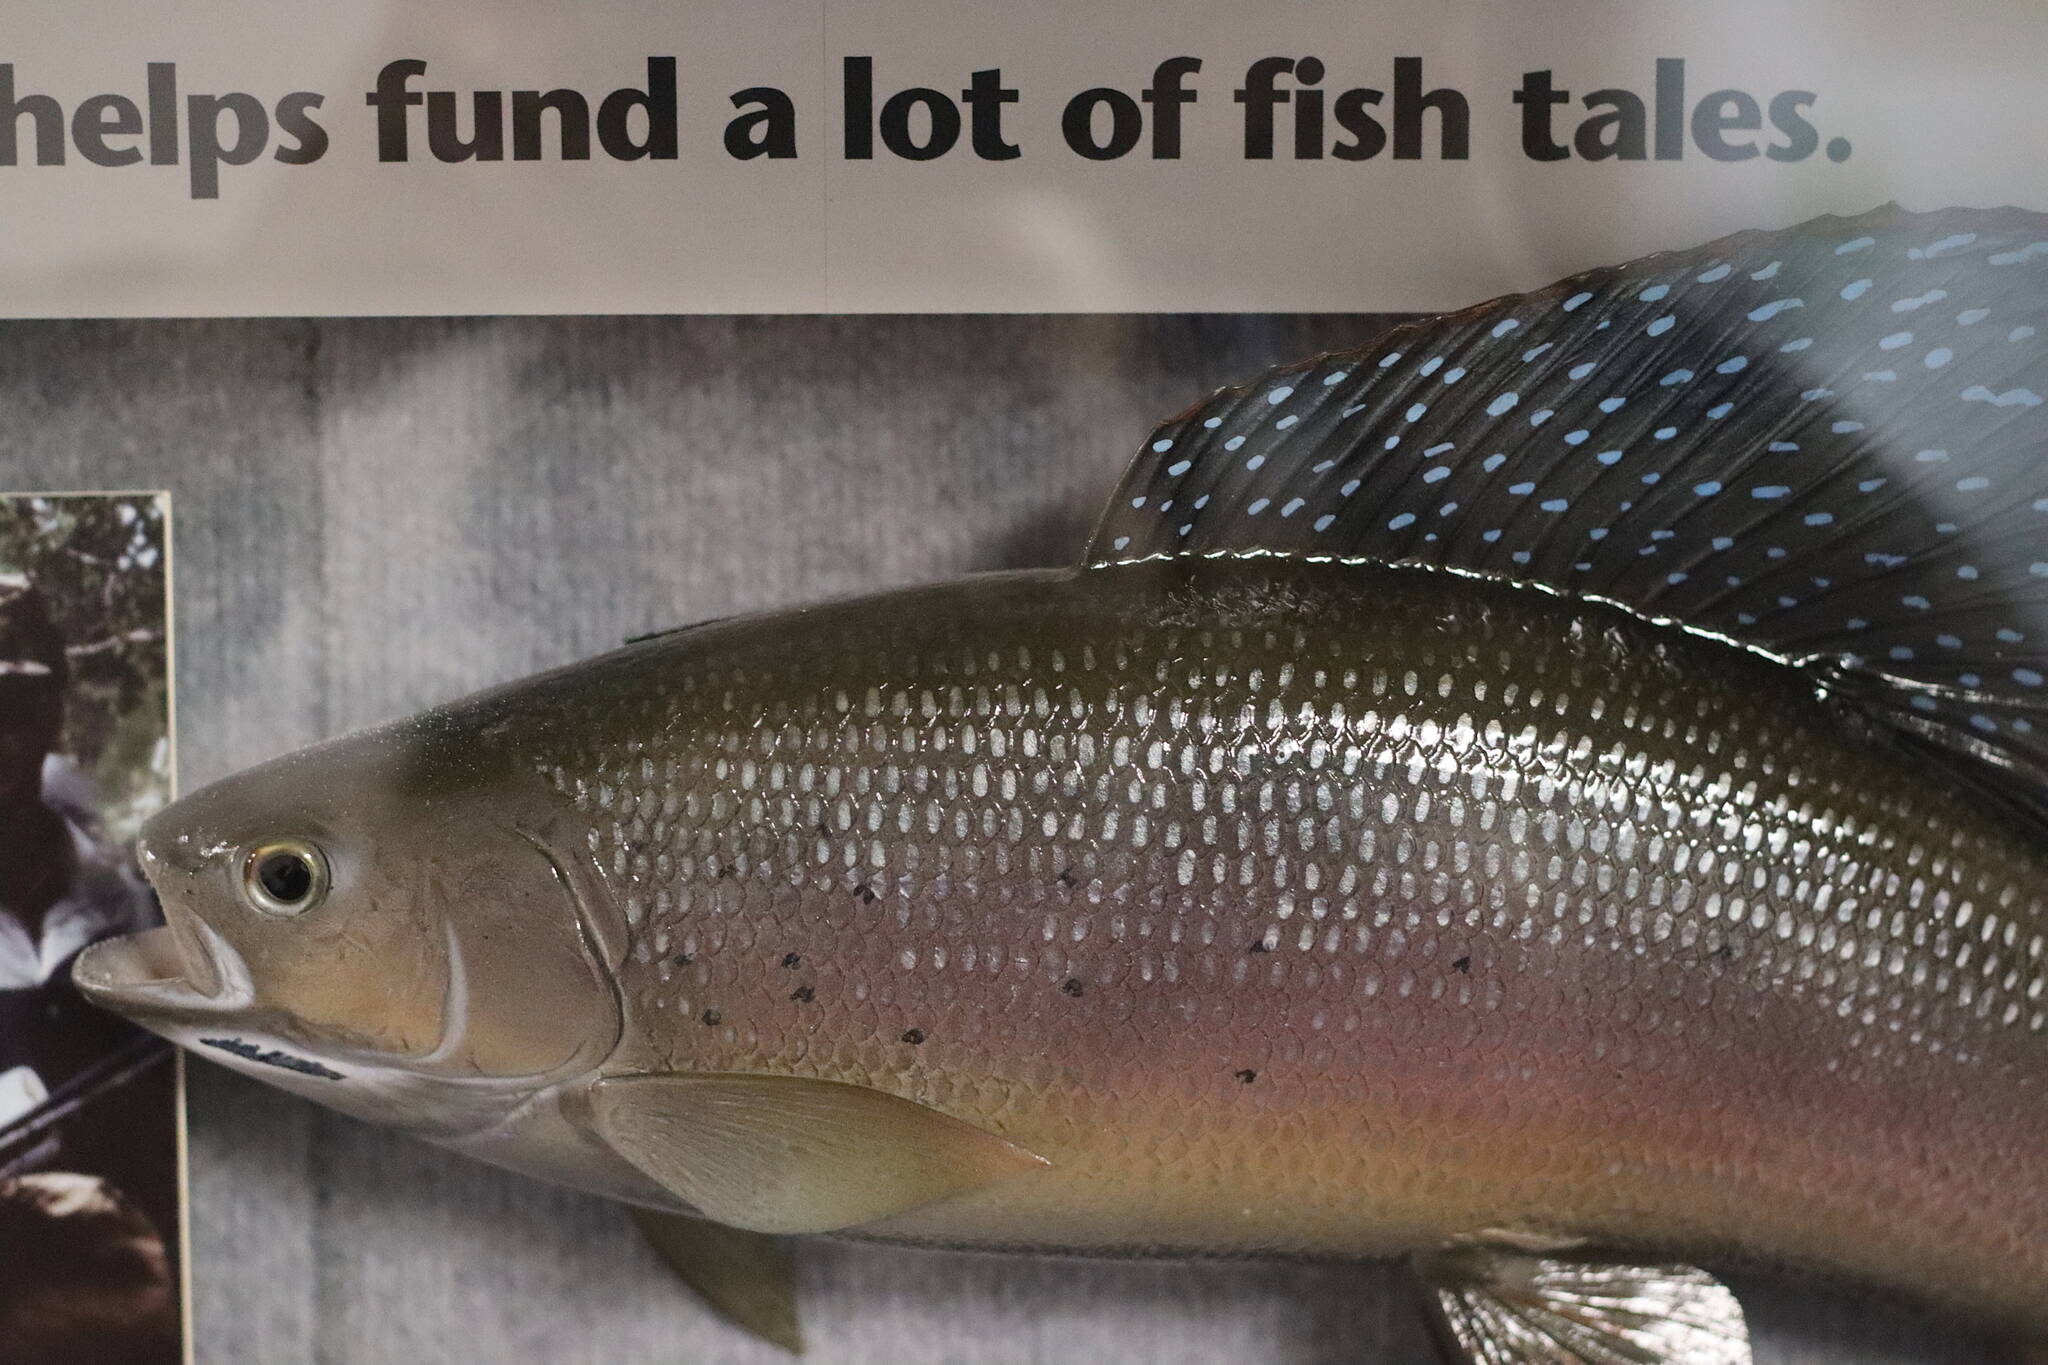 Folks at the Alaska State Capitol openly admit to plenty of fish tales, but to a large degree in ways intended to benefit residents and sometimes even the fish. (Mark Sabbatini / Juneau Empire)